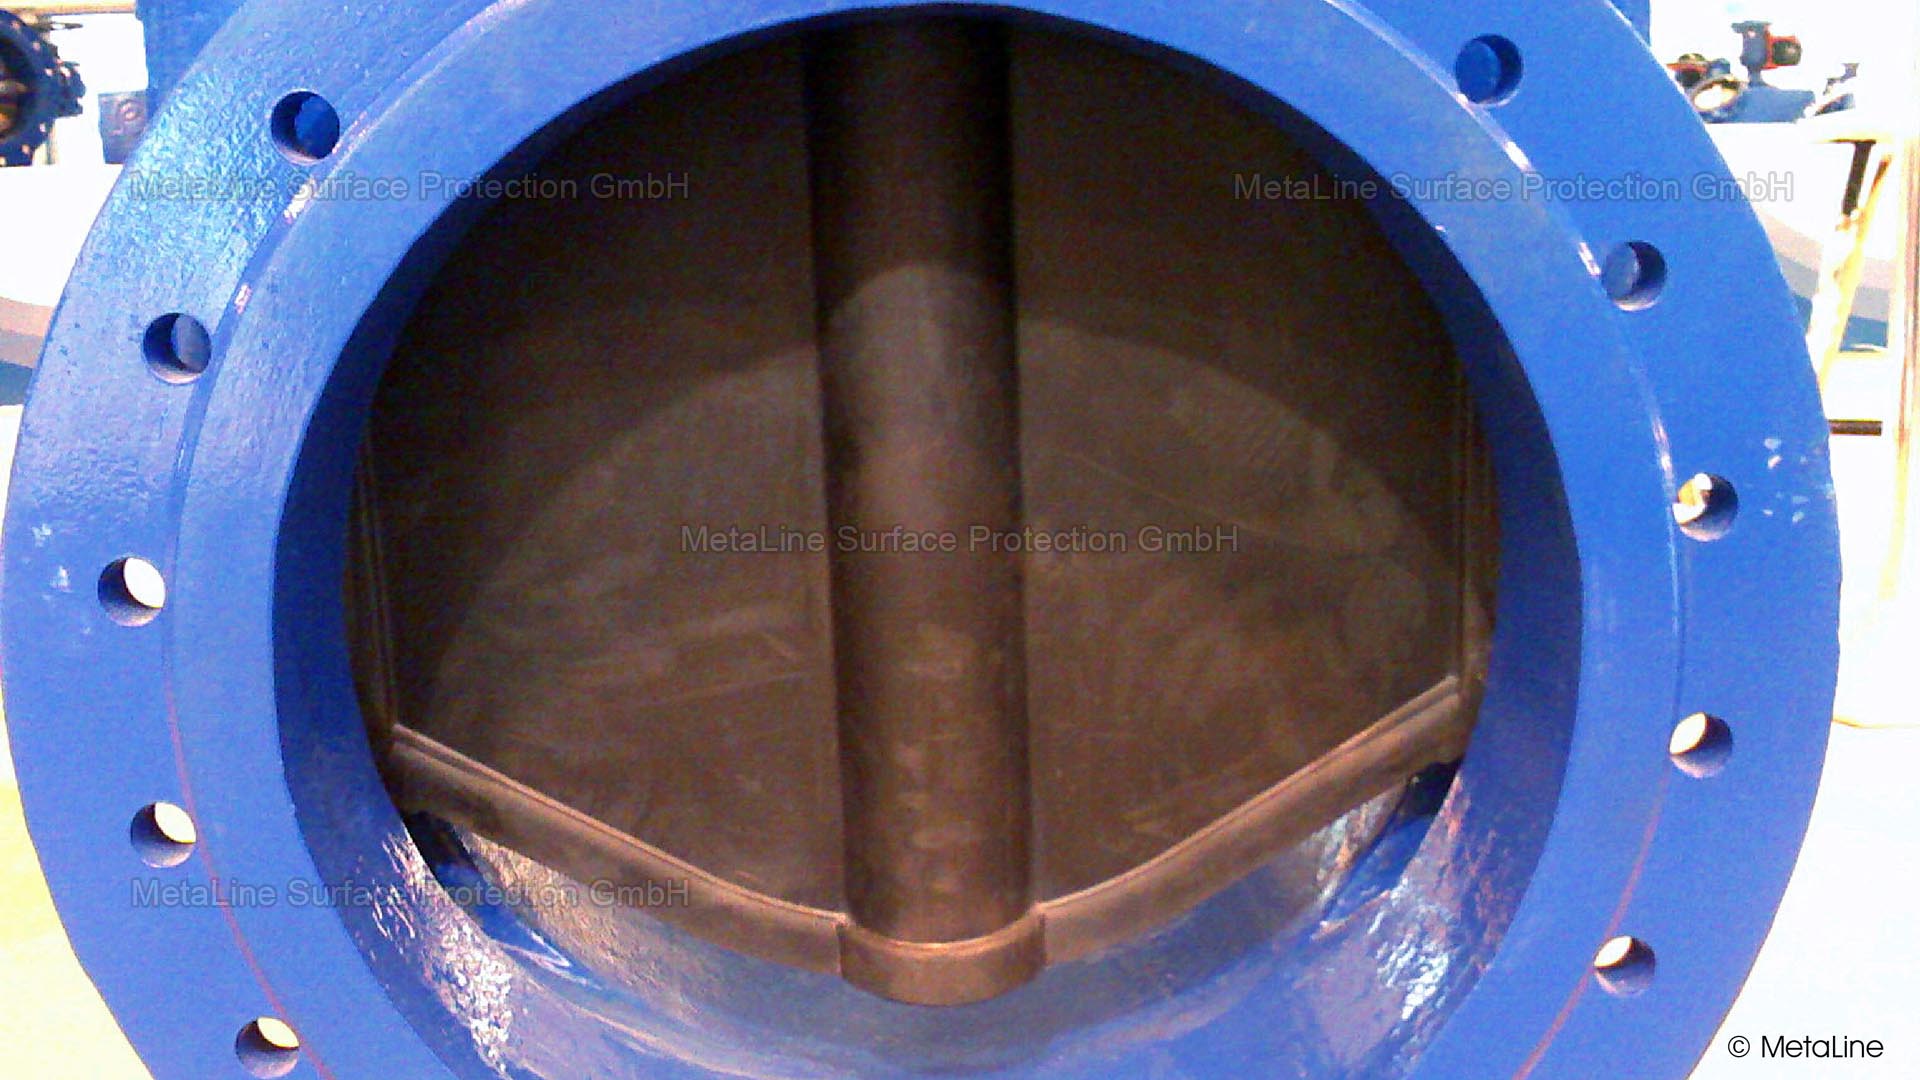 <!-- START: ConditionalContent --><!-- END: ConditionalContent -->   <!-- START: ConditionalContent --> pipe, bend, wear, abrasion, wear, erosion, corrosion, coating, repair, spare part, component, plant, decay, rust, undersize <!-- END: ConditionalContent -->   <!-- START: ConditionalContent --><!-- END: ConditionalContent -->   <!-- START: ConditionalContent --><!-- END: ConditionalContent -->